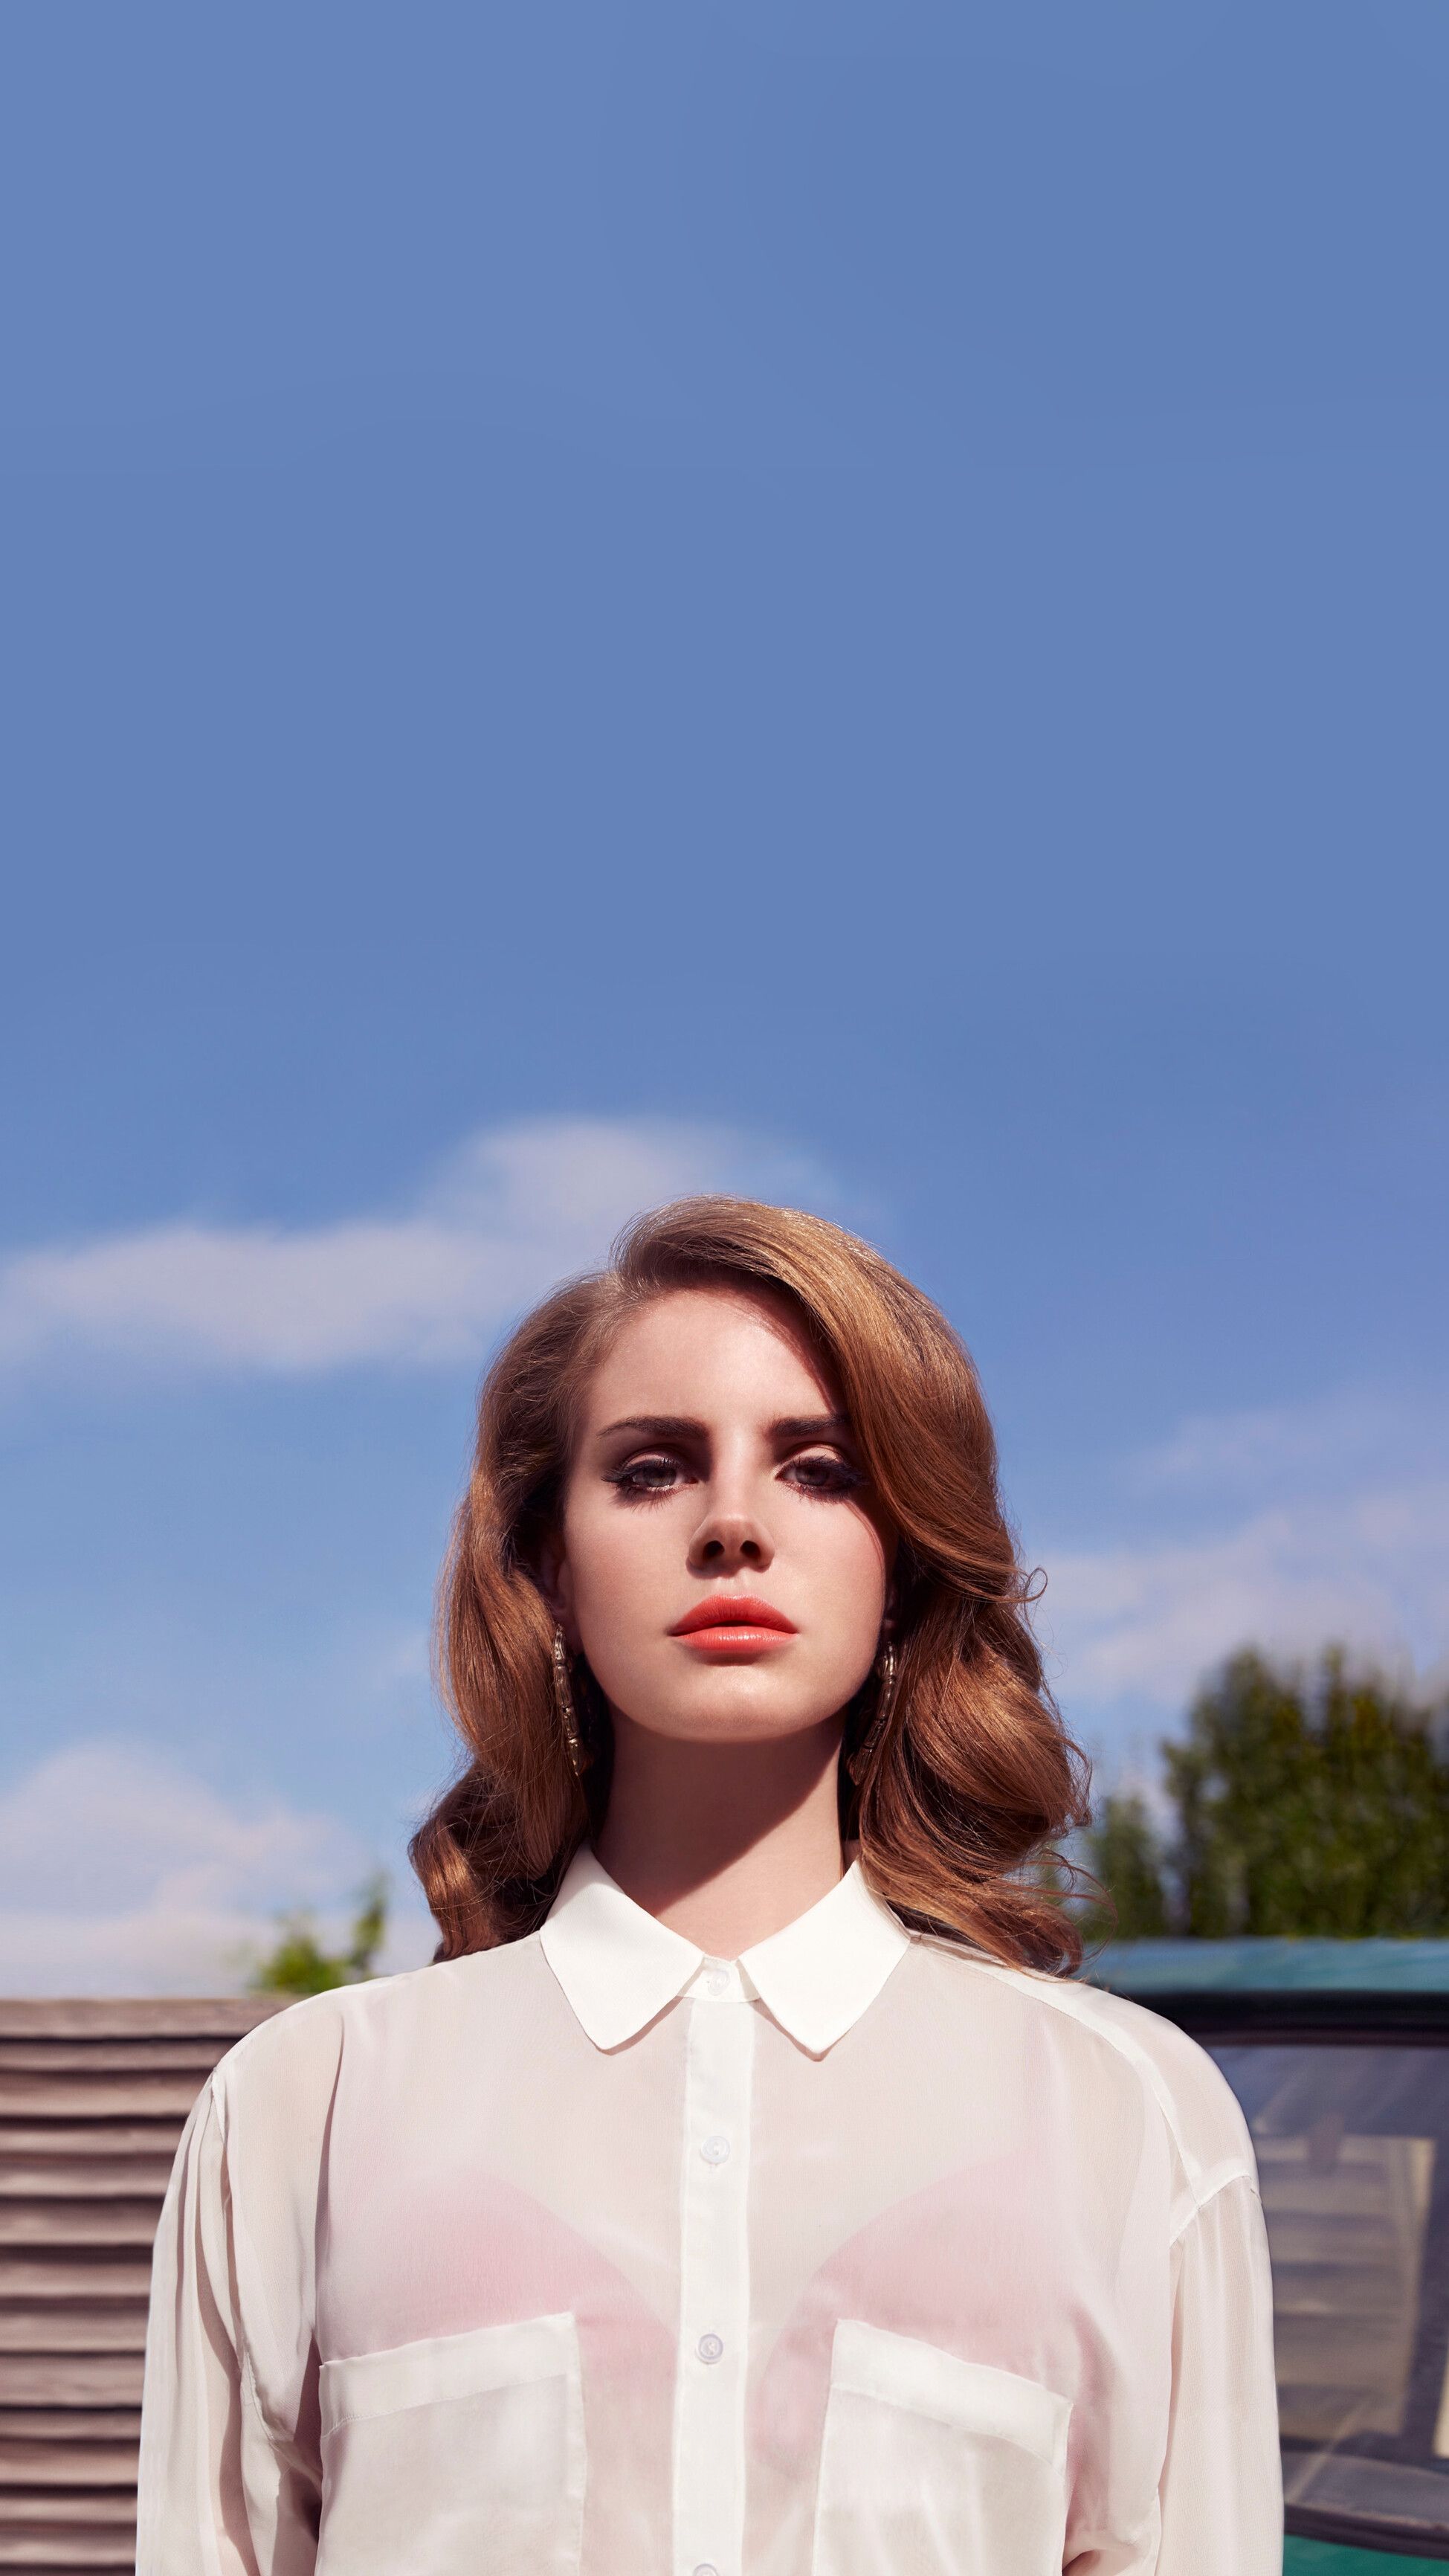 A woman with a white shirt and red lipstick standing in front of a car - Lana Del Rey